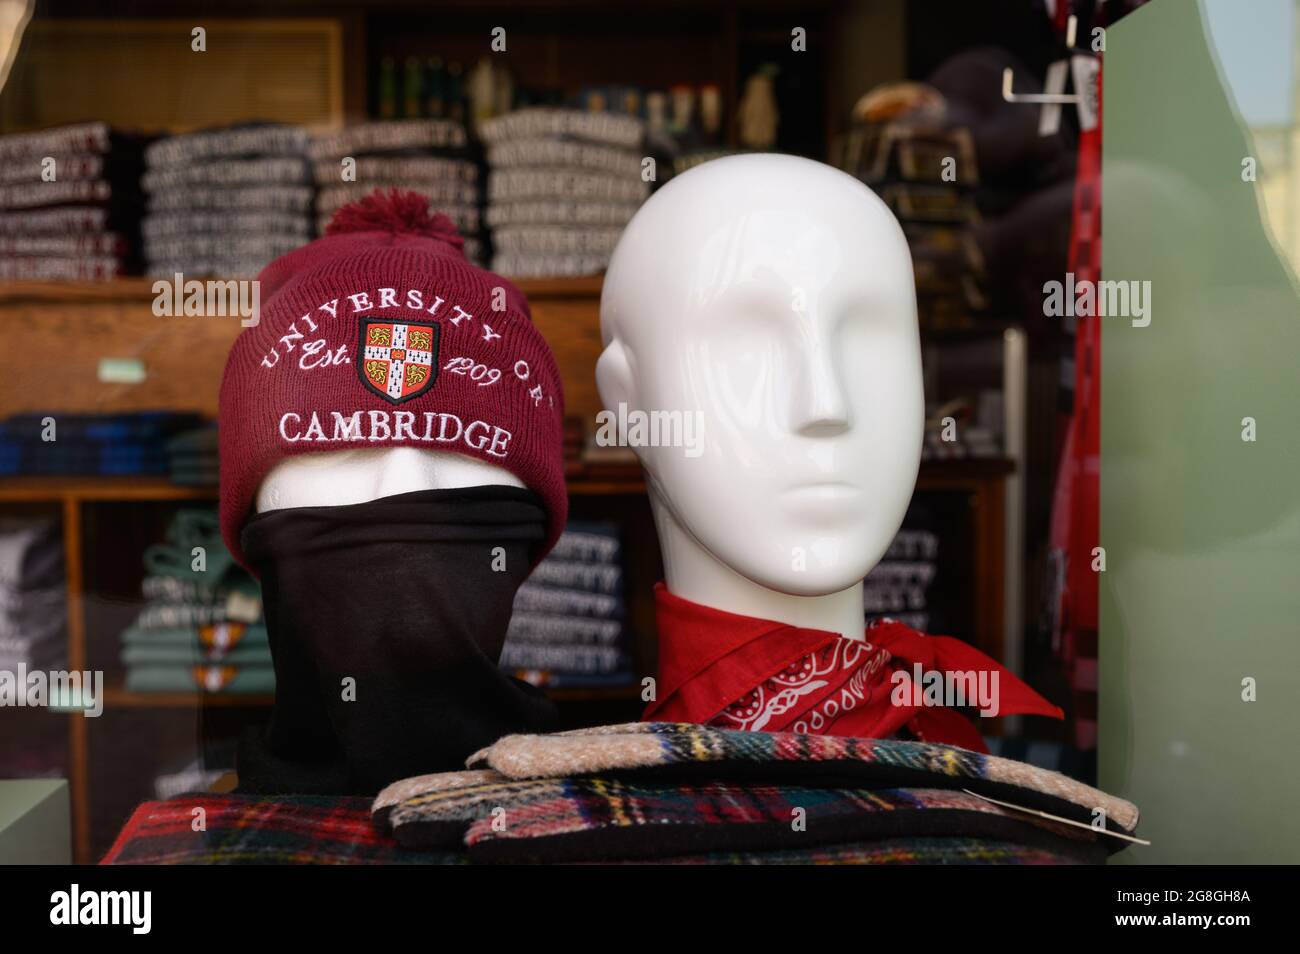 Two mannequin (dummy) heads in a shop window, one is wearing a beanie hat and mask, the other is not. Stock Photo